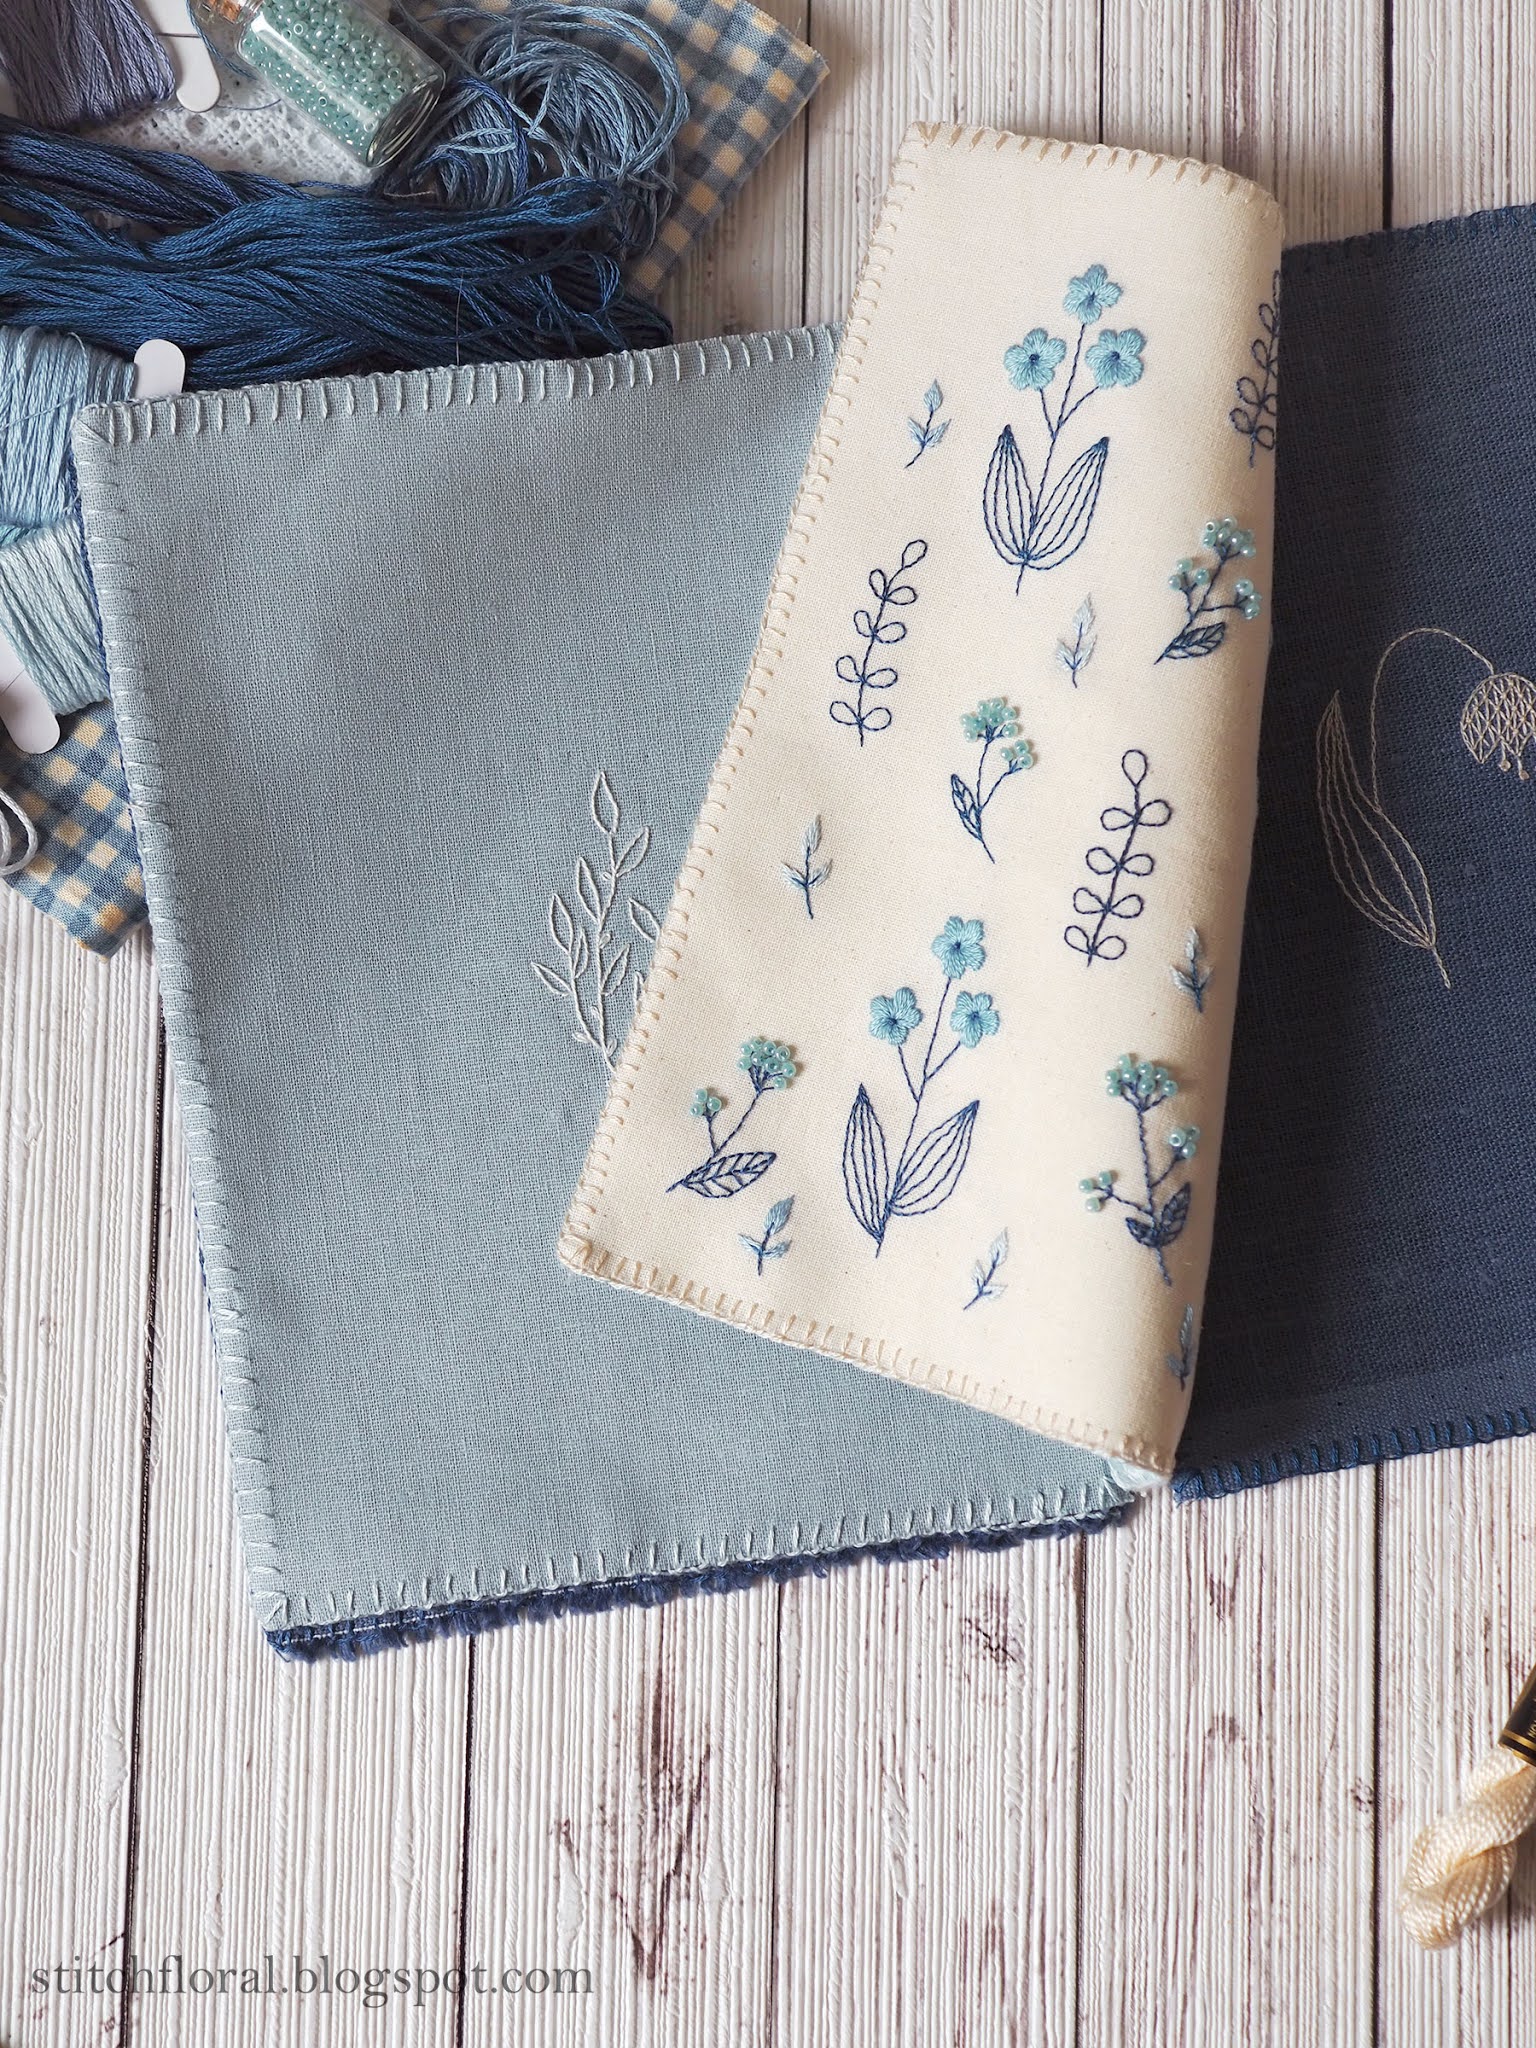 The Blue Embroidery Journal Stitch Floral